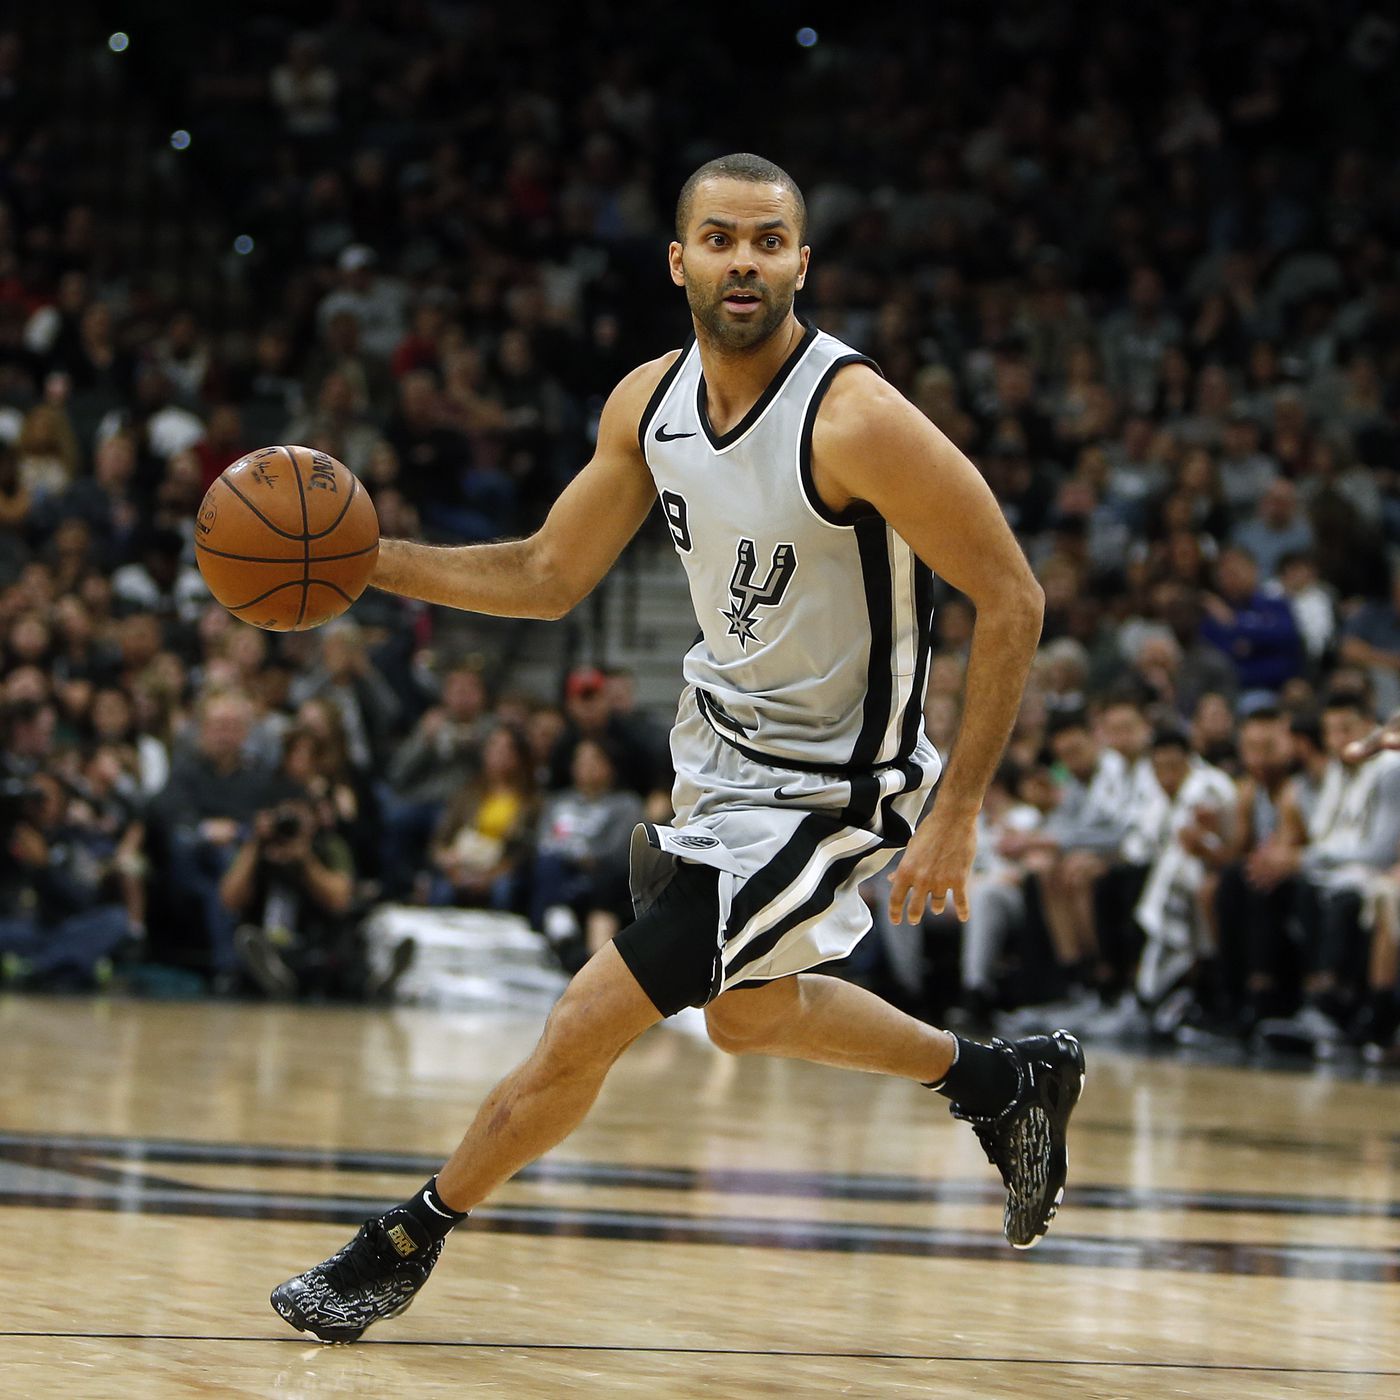 Tony Parker for the Spurs 